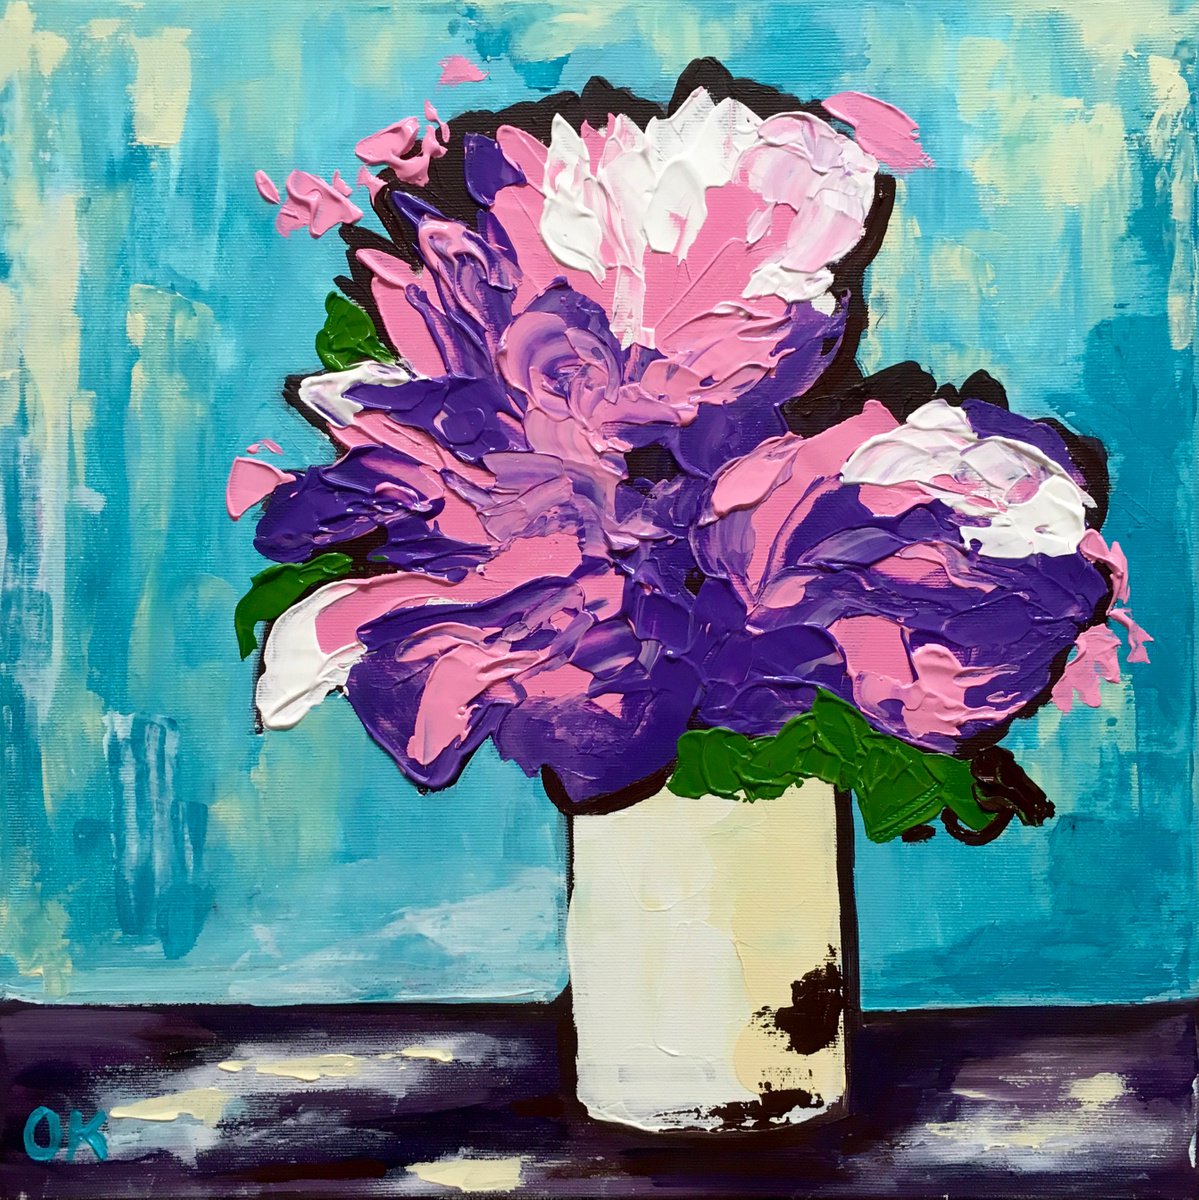 BOUQUET OF Abstract Peonies #16 palette knife Original Acrylic painting office home dec... by Olga Koval